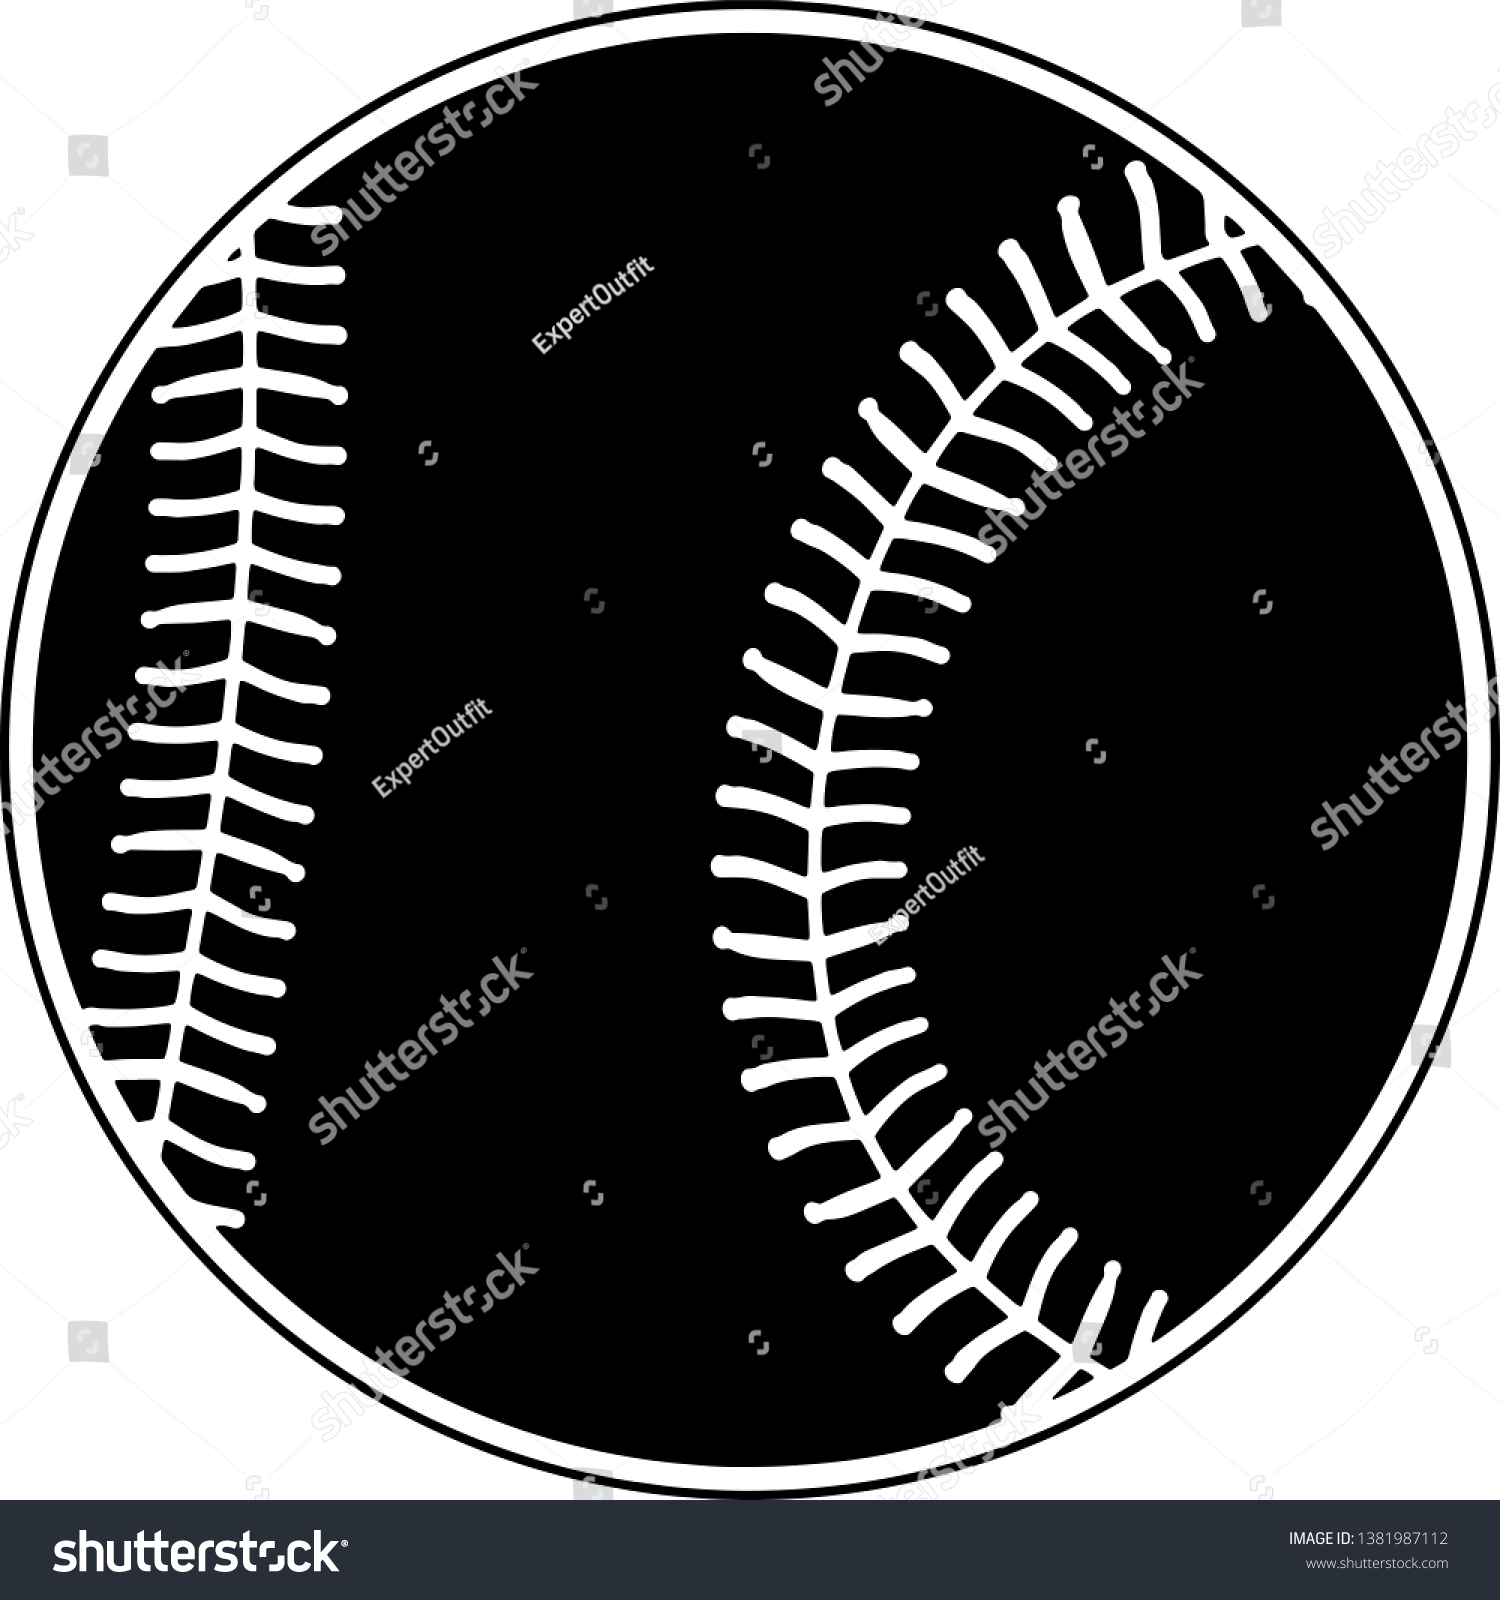 SVG of Baseball Ball Made Of Leather With Stitches svg